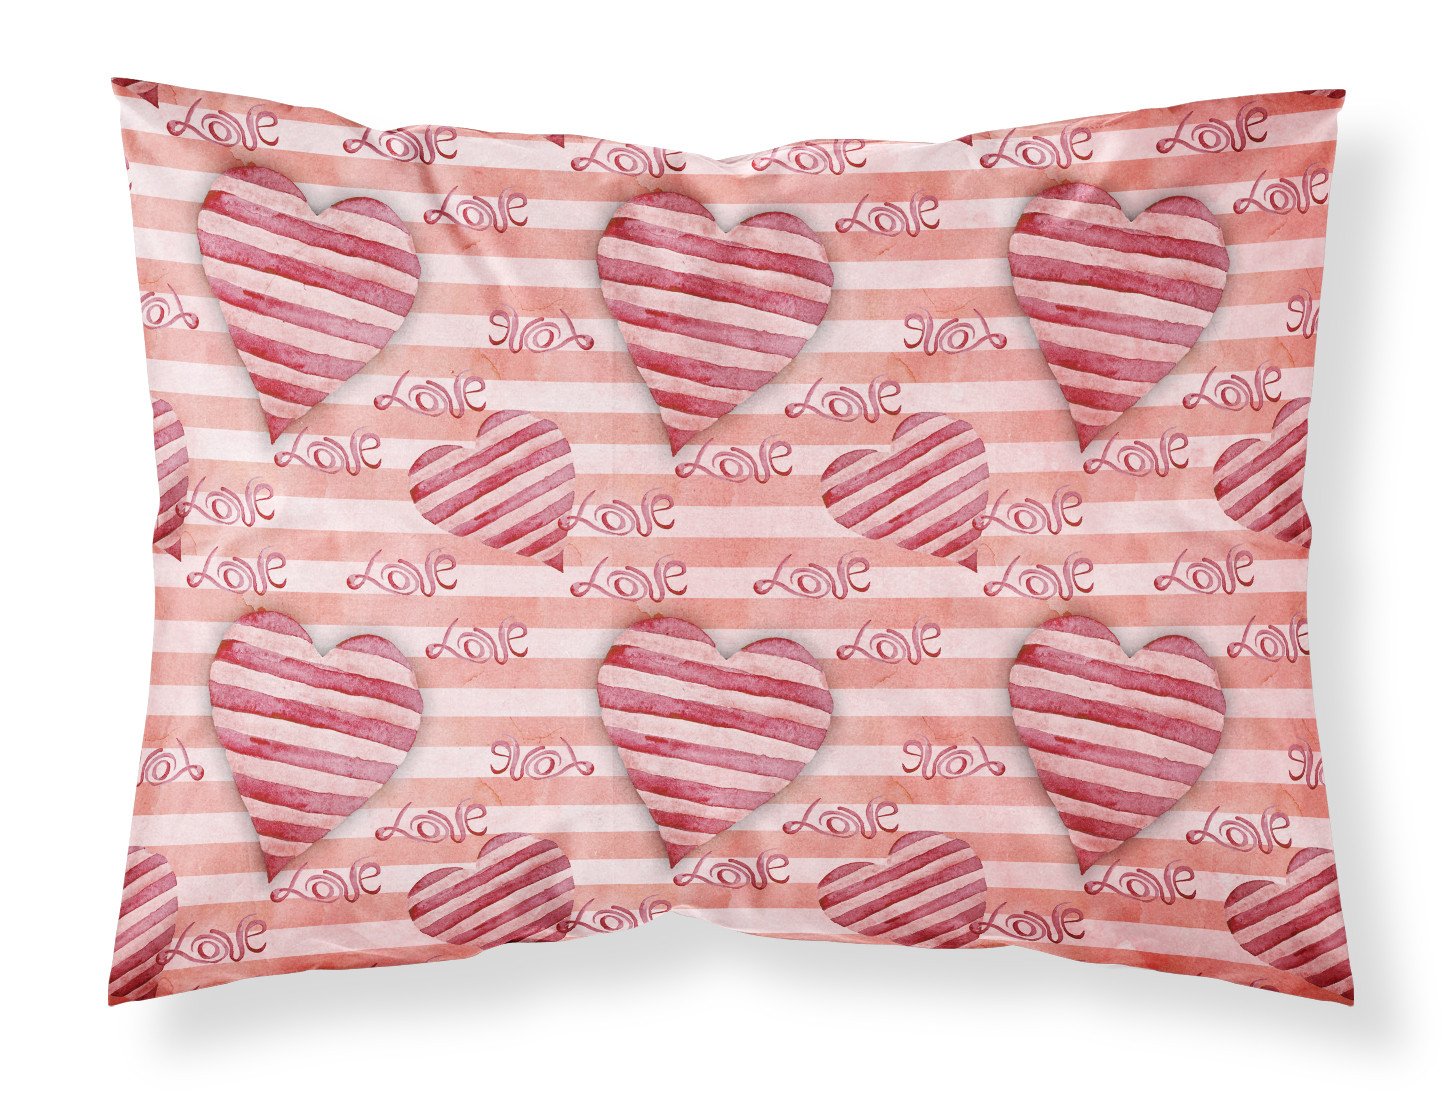 Watercolor Red Striped Hearts Fabric Standard Pillowcase BB7567PILLOWCASE by Caroline's Treasures